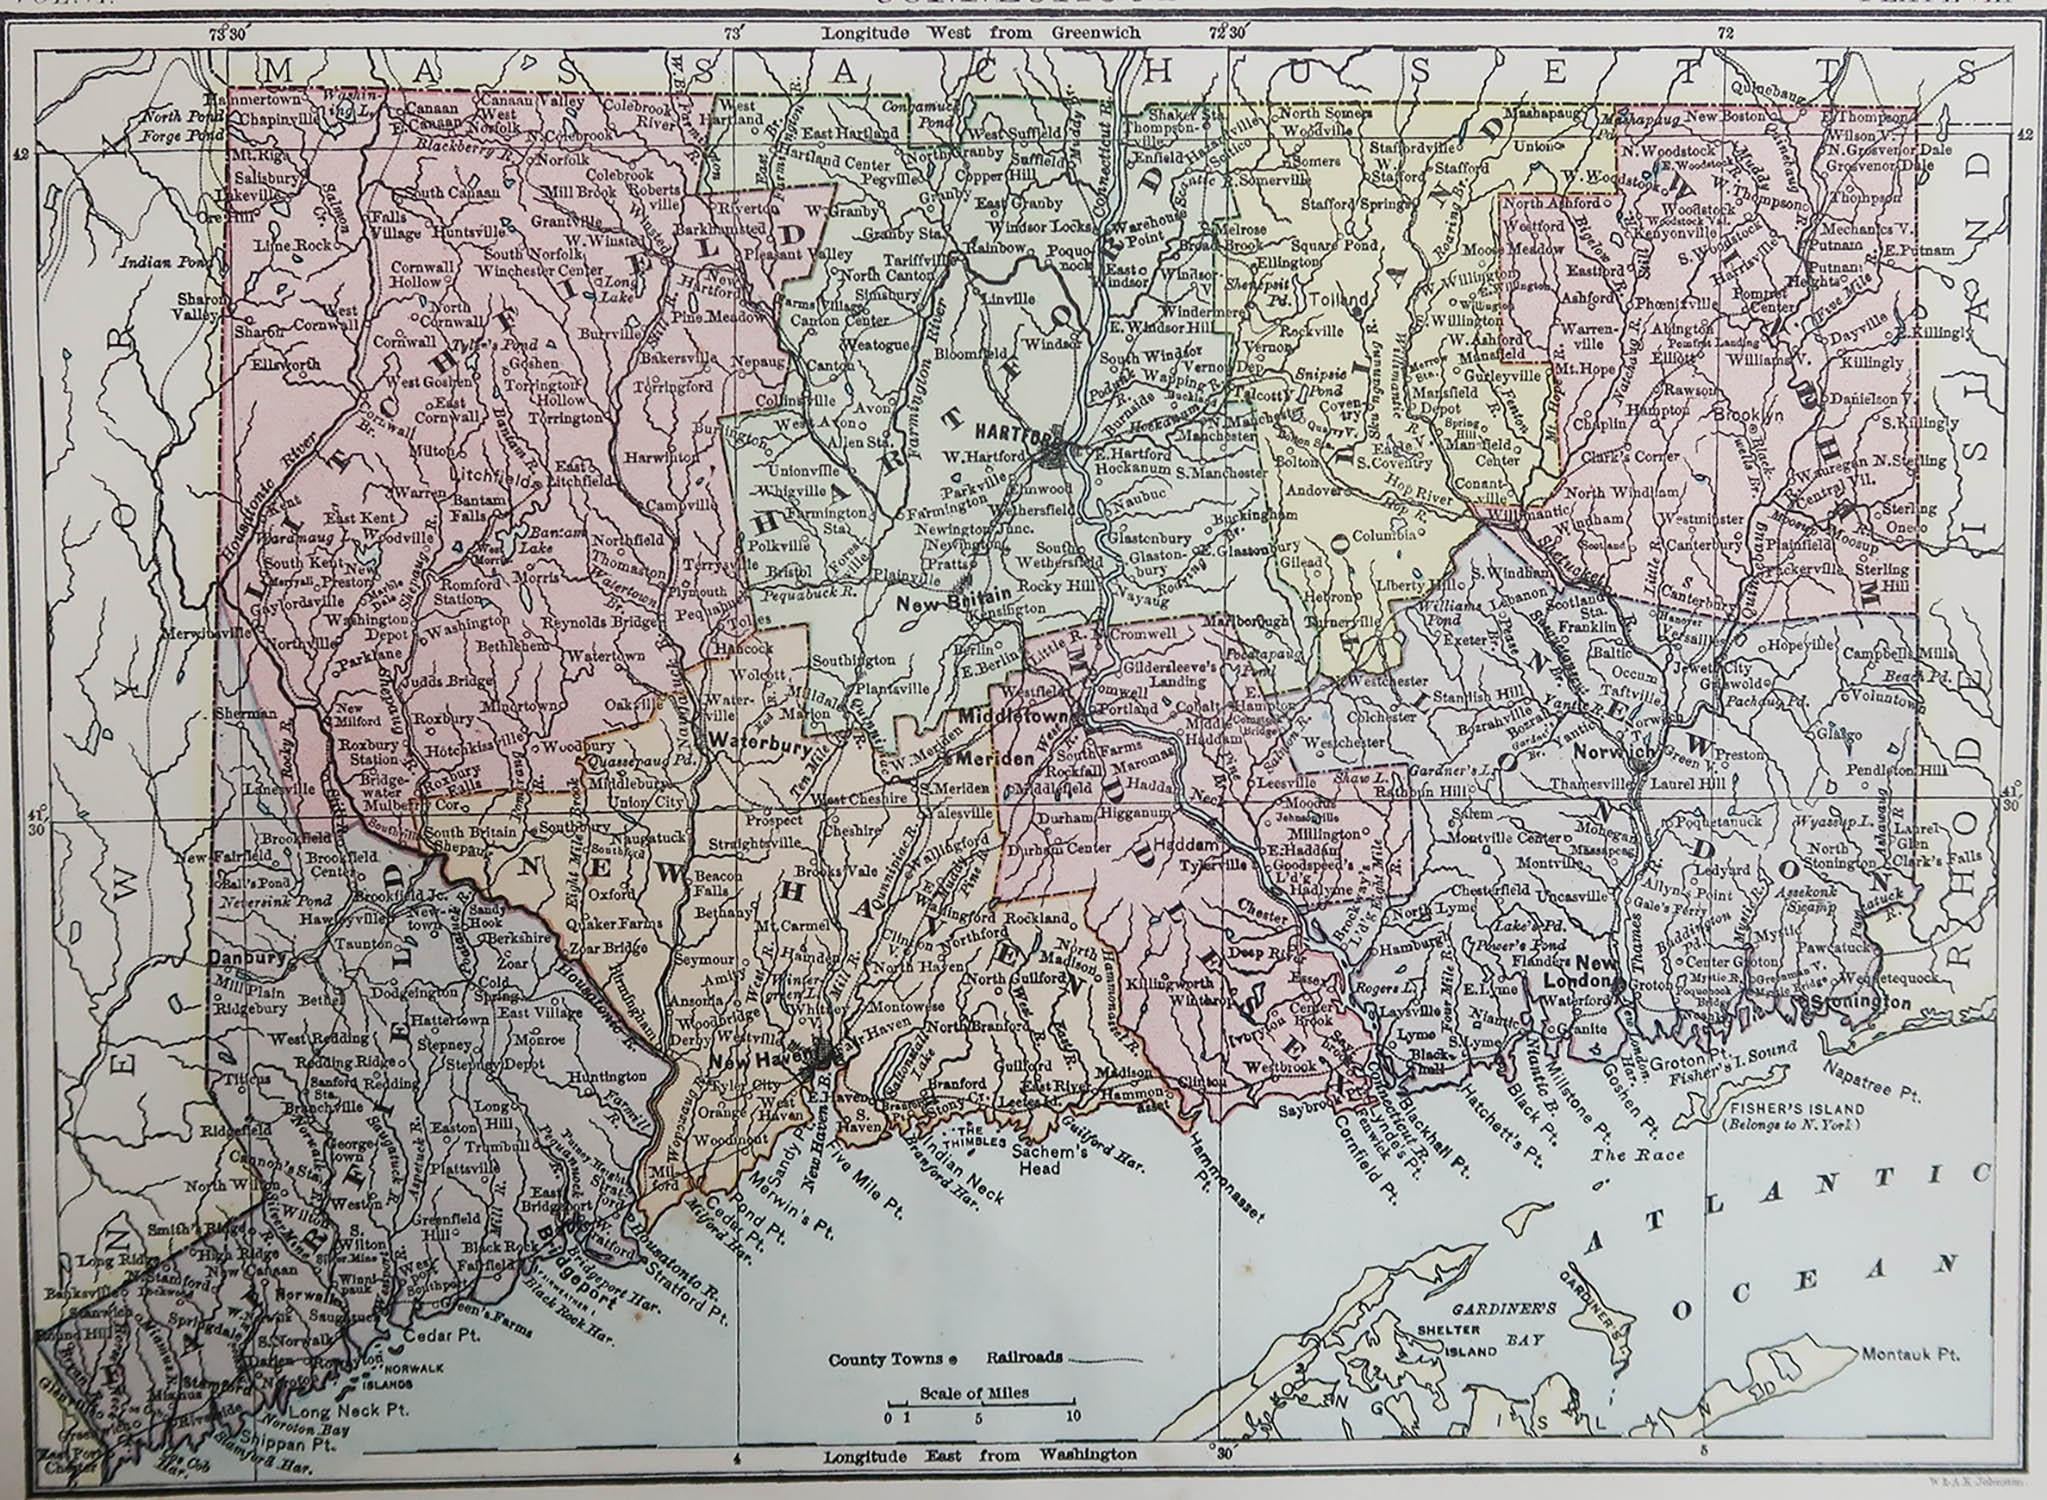 Great map of Connecticut

Drawn and Engraved by W. & A.K. Johnston

Published By A & C Black, Edinburgh.

Original colour

Unframed.

Repair to a minor tear on left edge.








